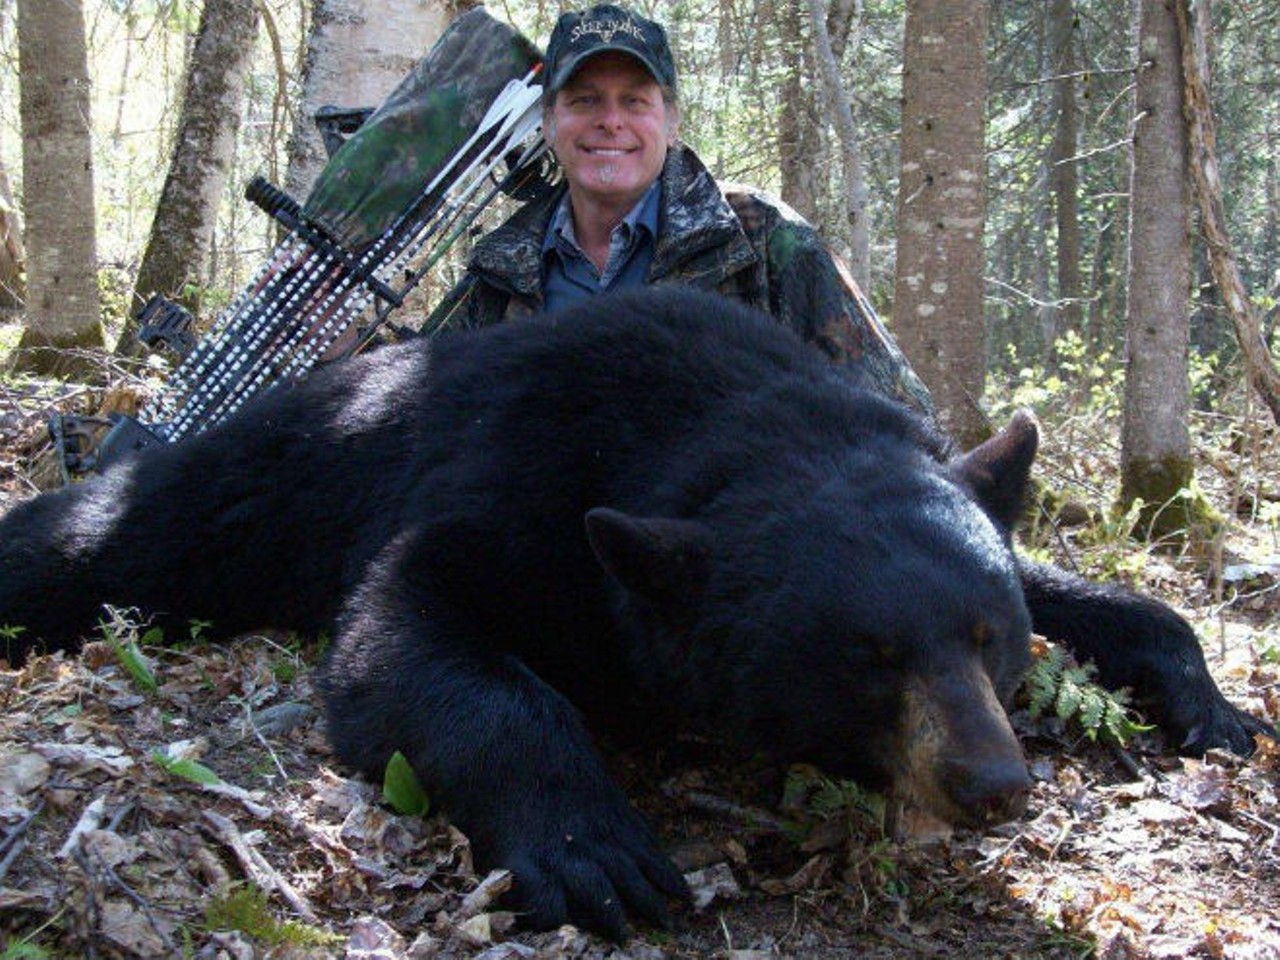 You could go for a hike and get shot by one of the 2000 Florida bear hunters, including Ted Nugent.
Photo via ArcheryTalkBlog